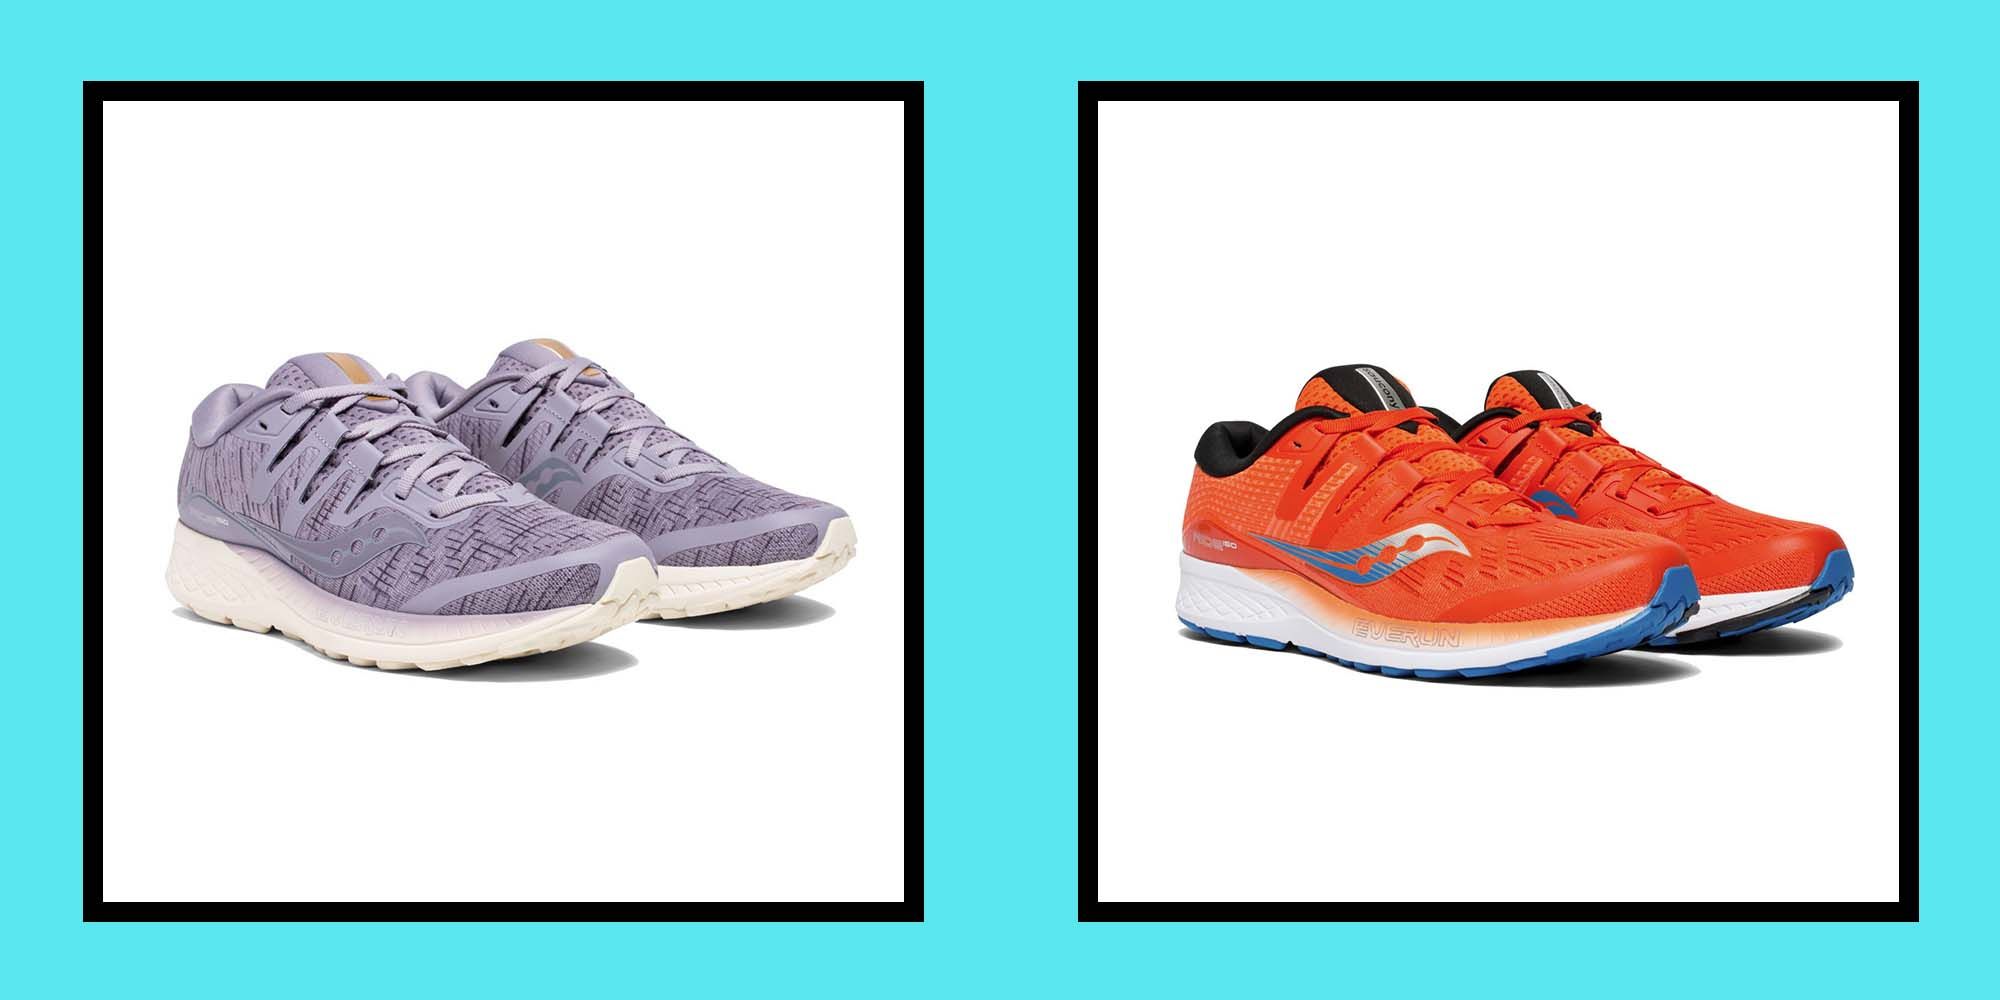 saucony running shoes best price